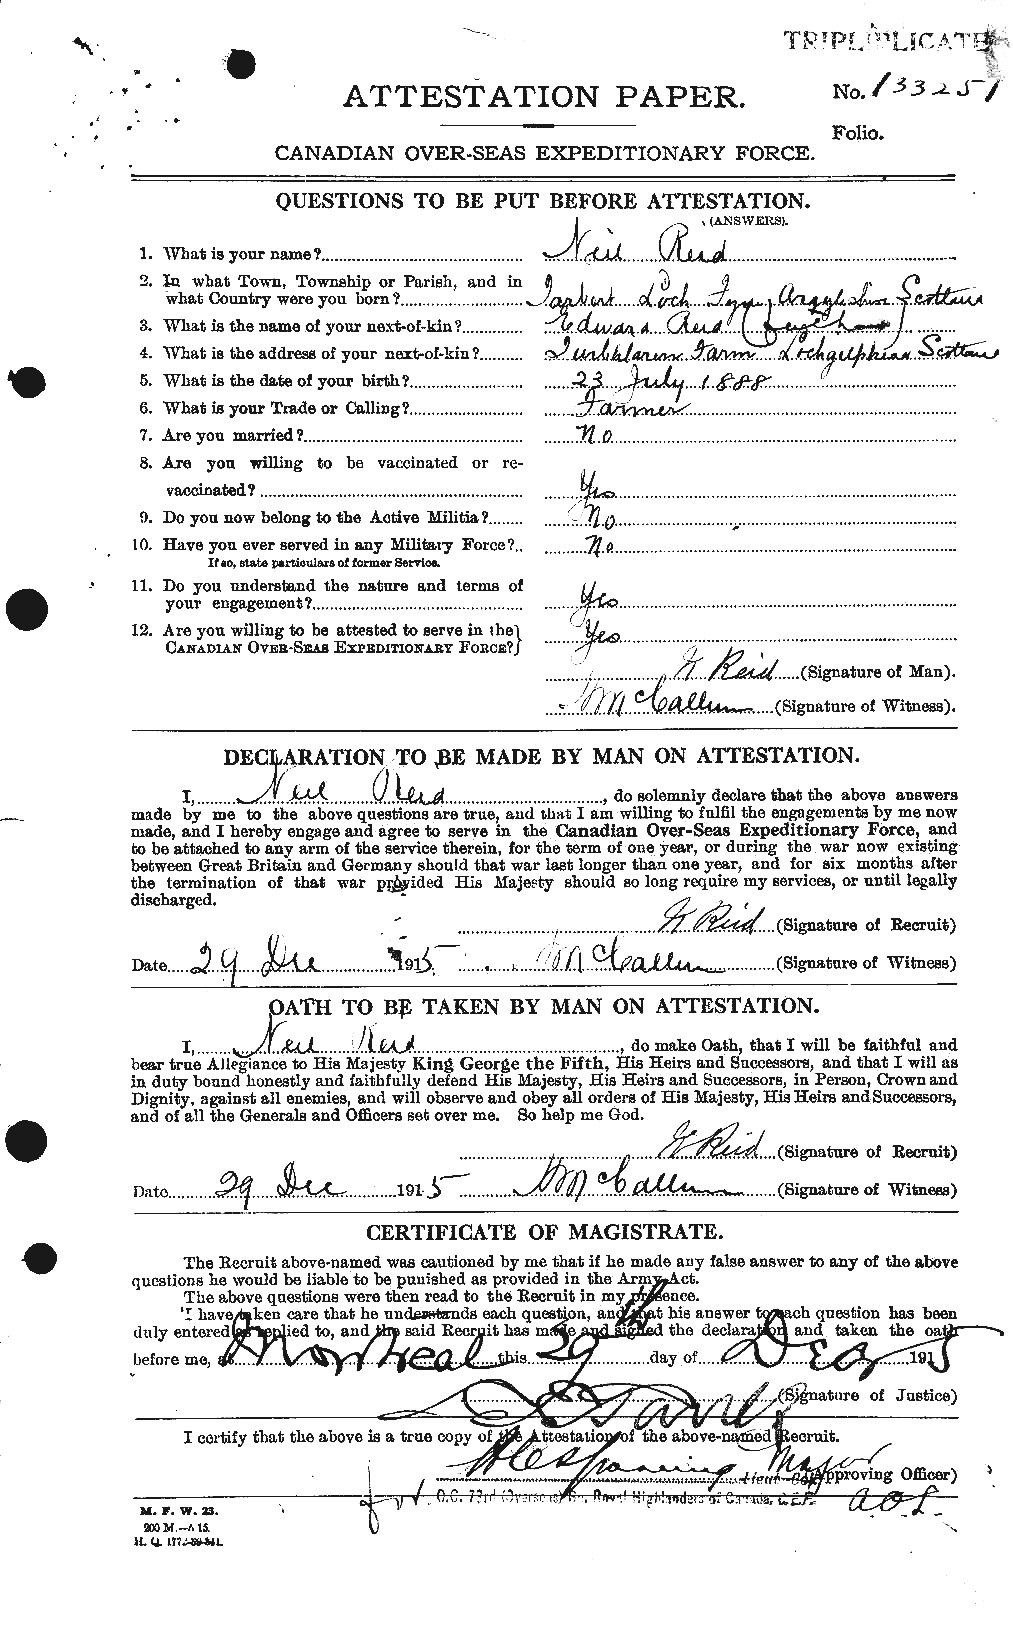 Personnel Records of the First World War - CEF 598958a